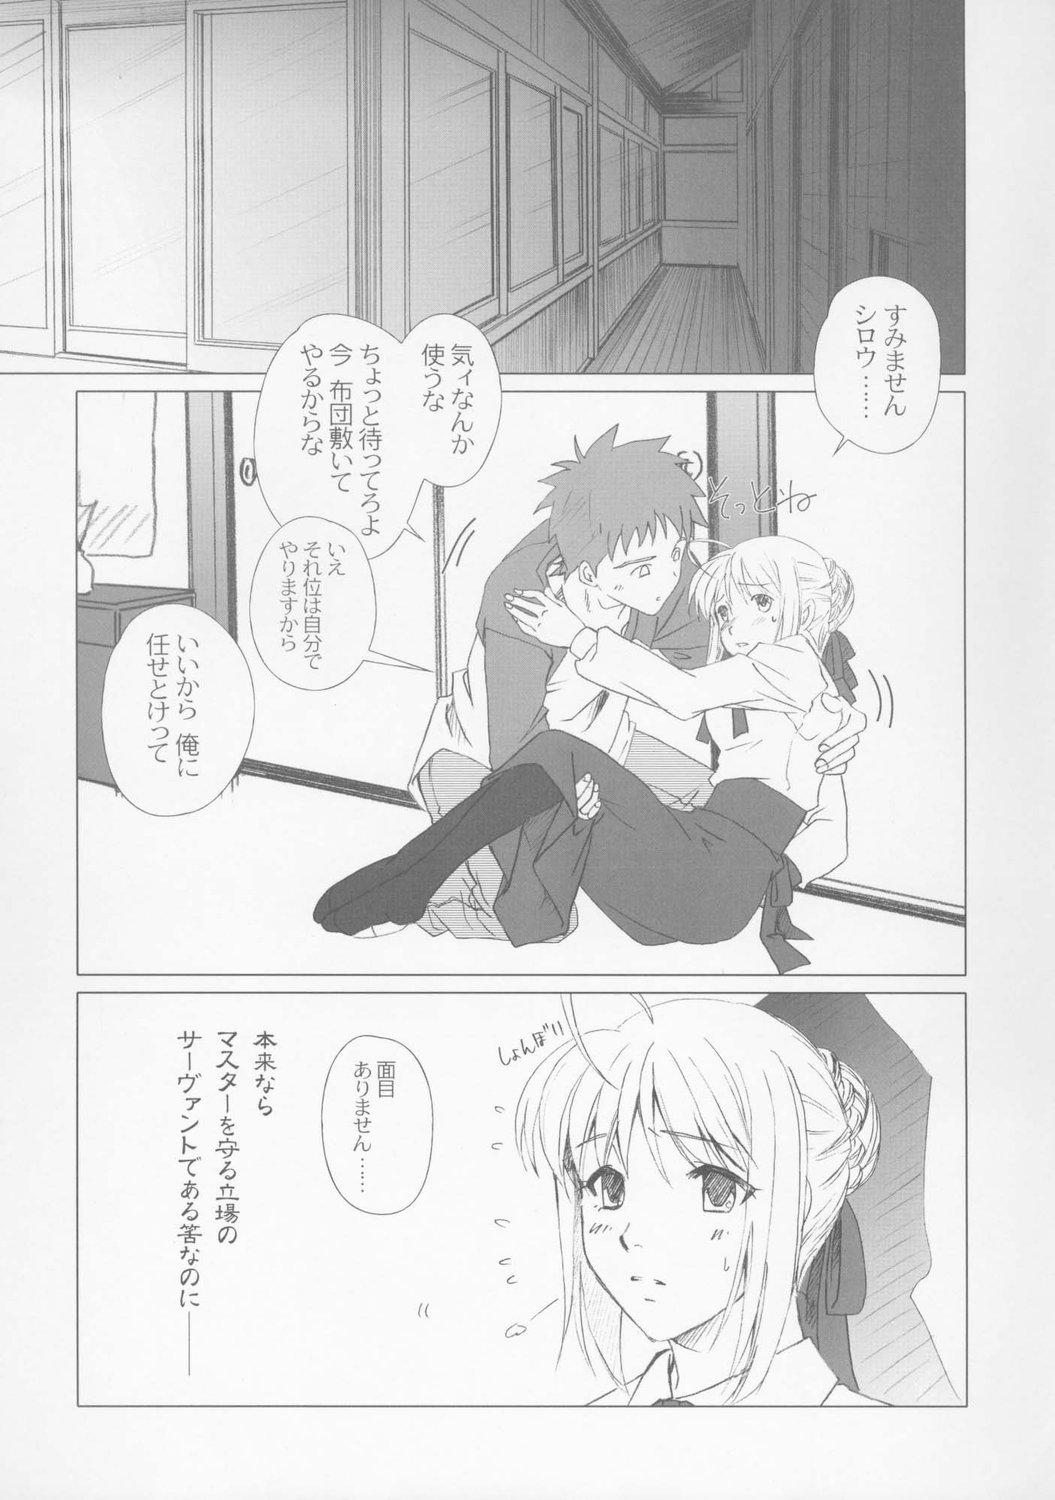 This Eien no Uta - Ever Song - Fate stay night Fate hollow ataraxia Yoga - Page 7